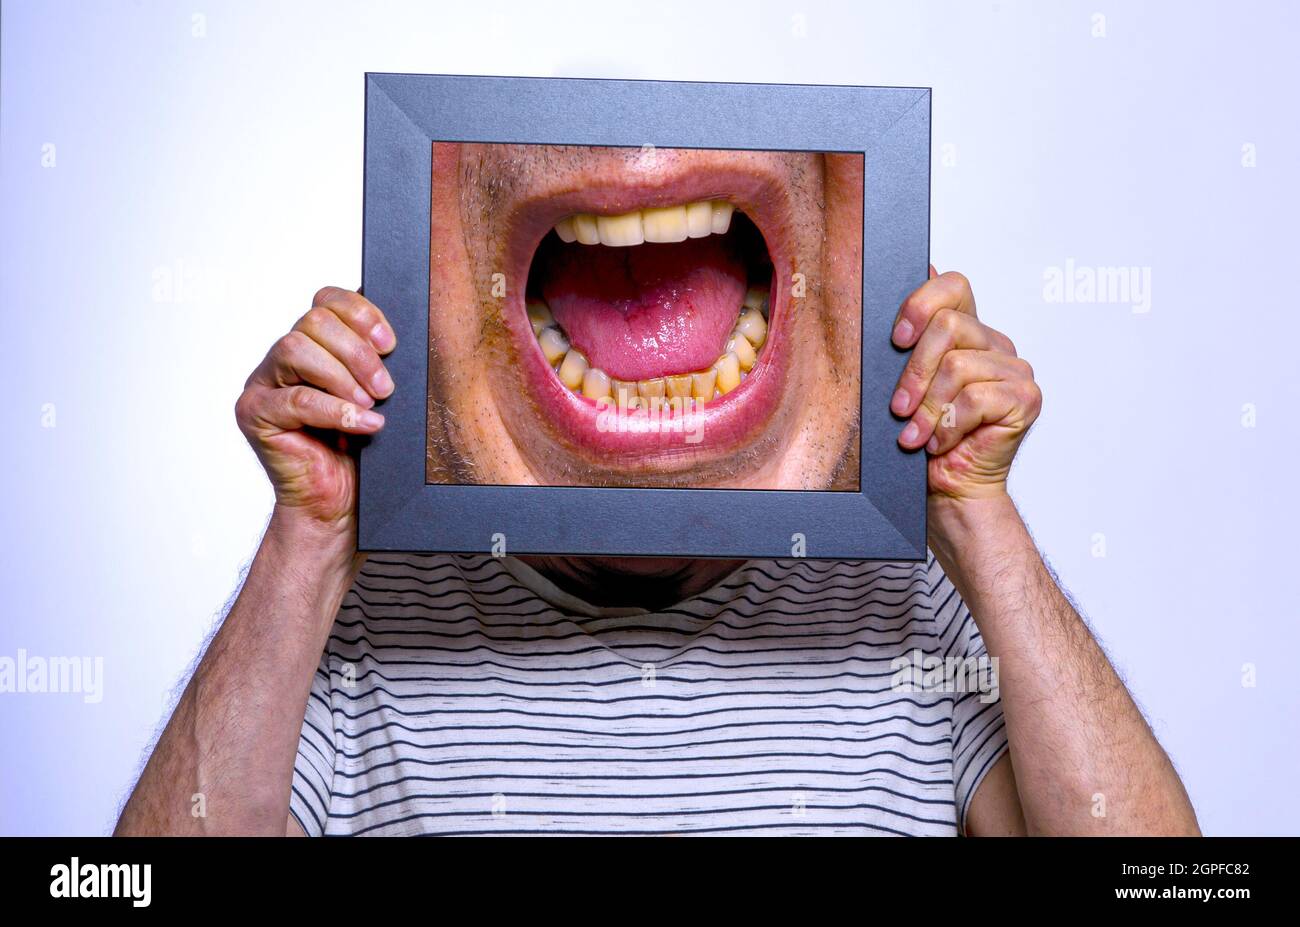 All mouth. Stock Photo